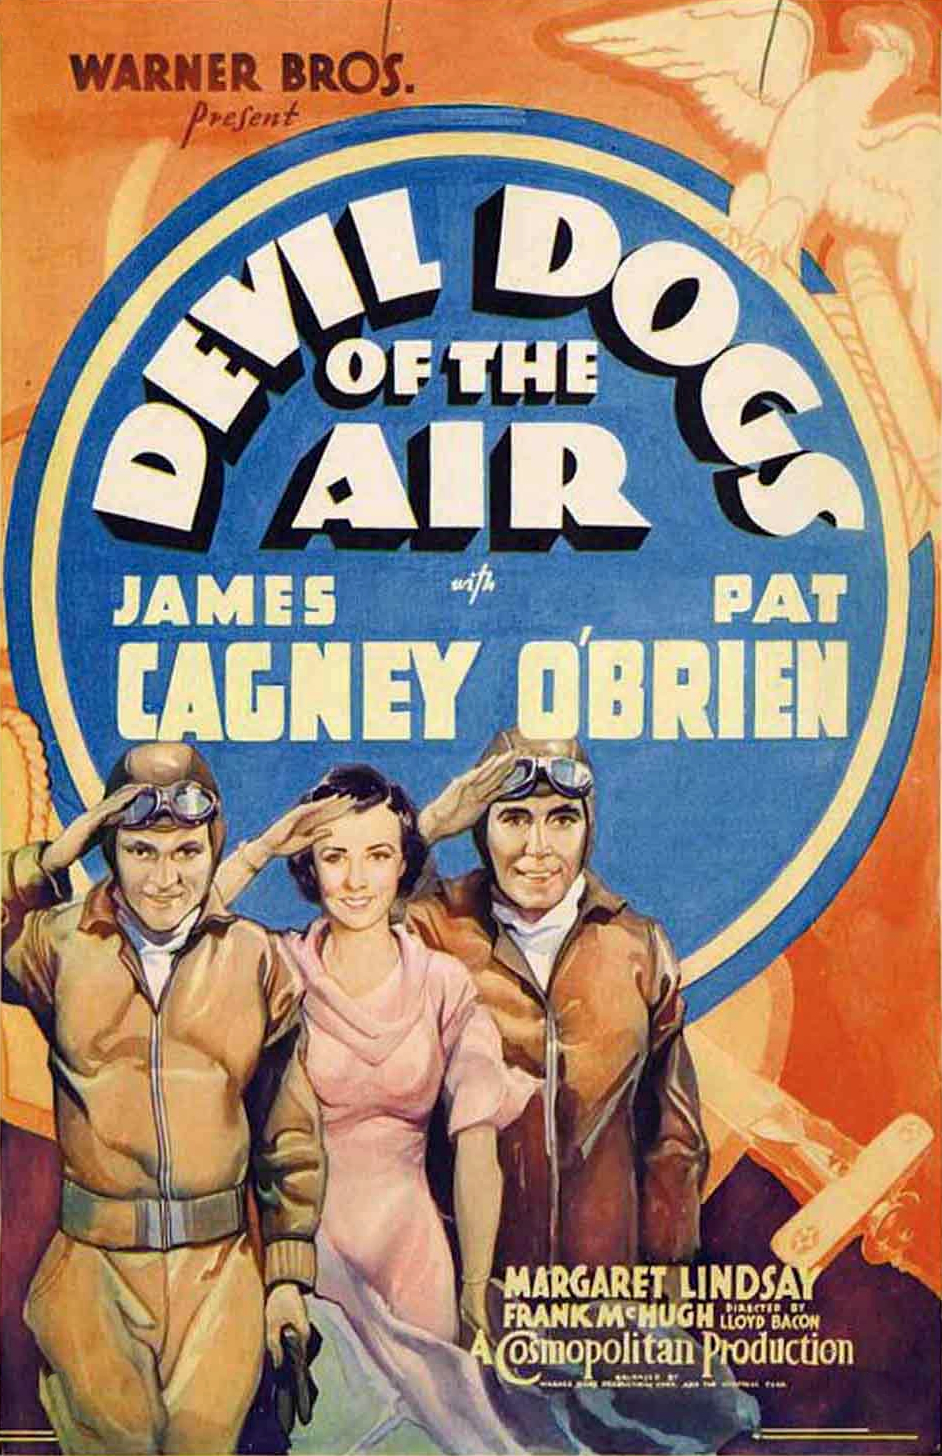 James Cagney, Pat O'Brien and Margaret Lindsay in Devil Dogs of the Air (1935)